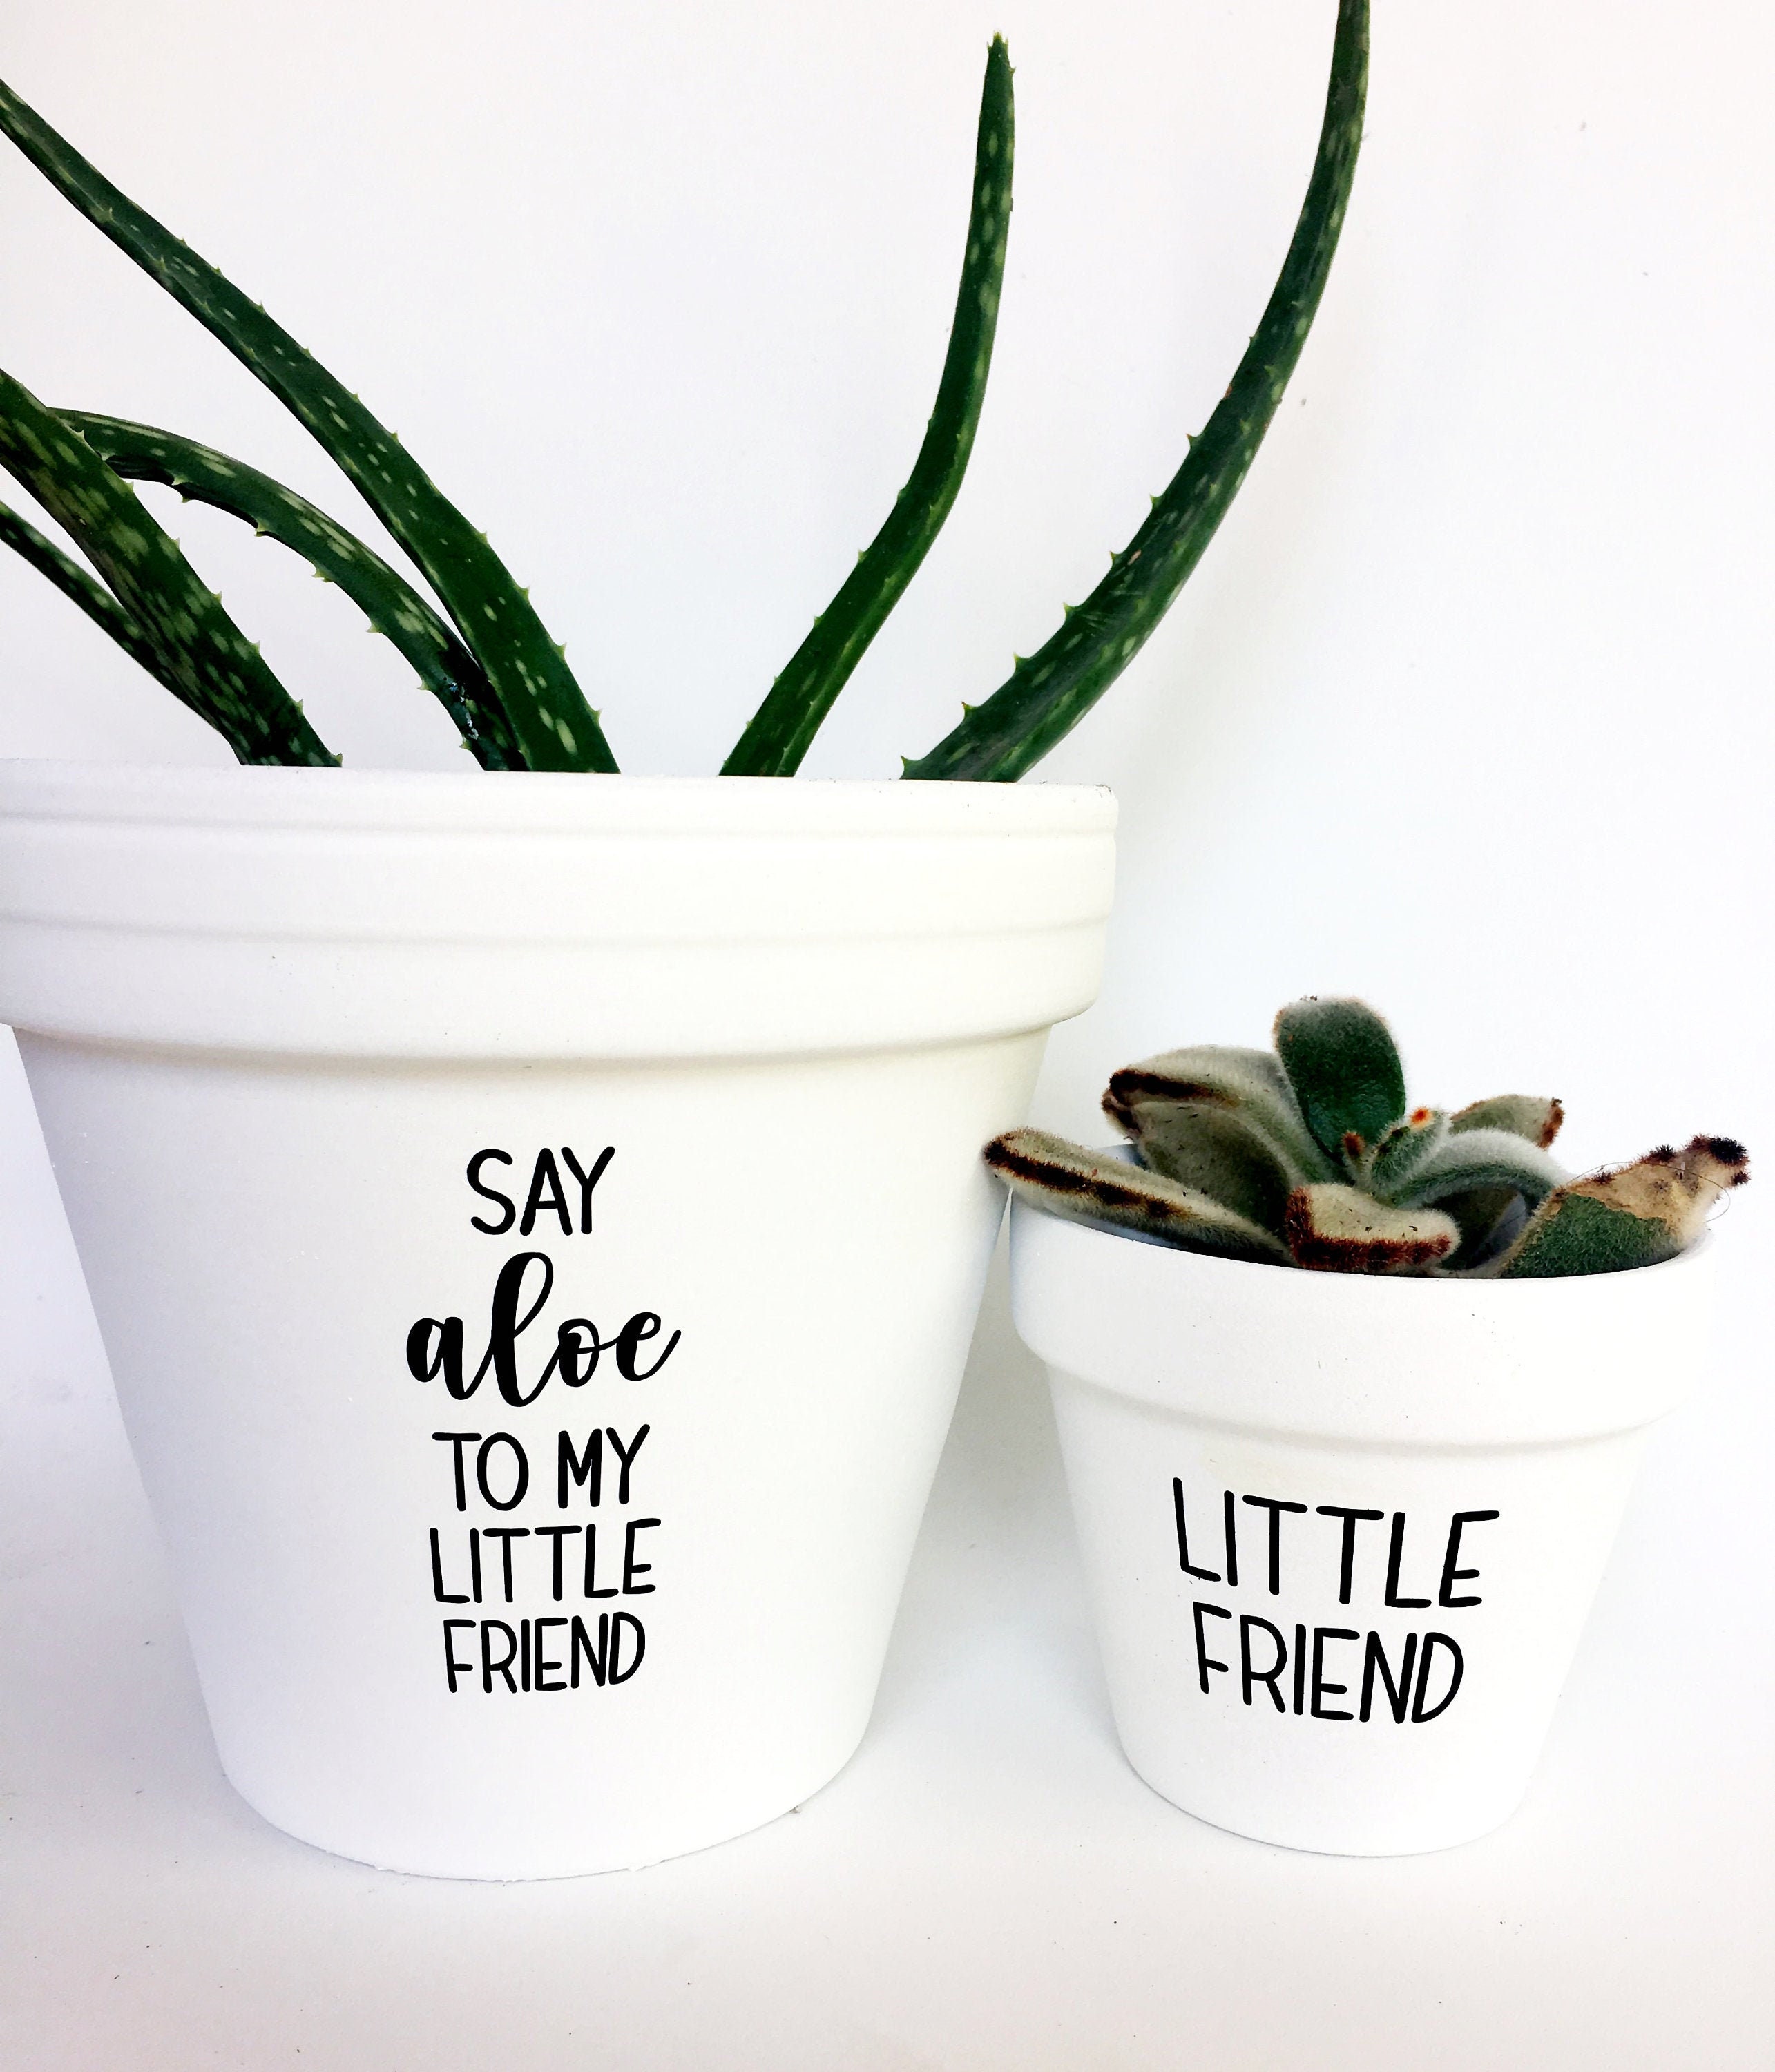 Say Aloe to My Little Friend and Little Friend Planter